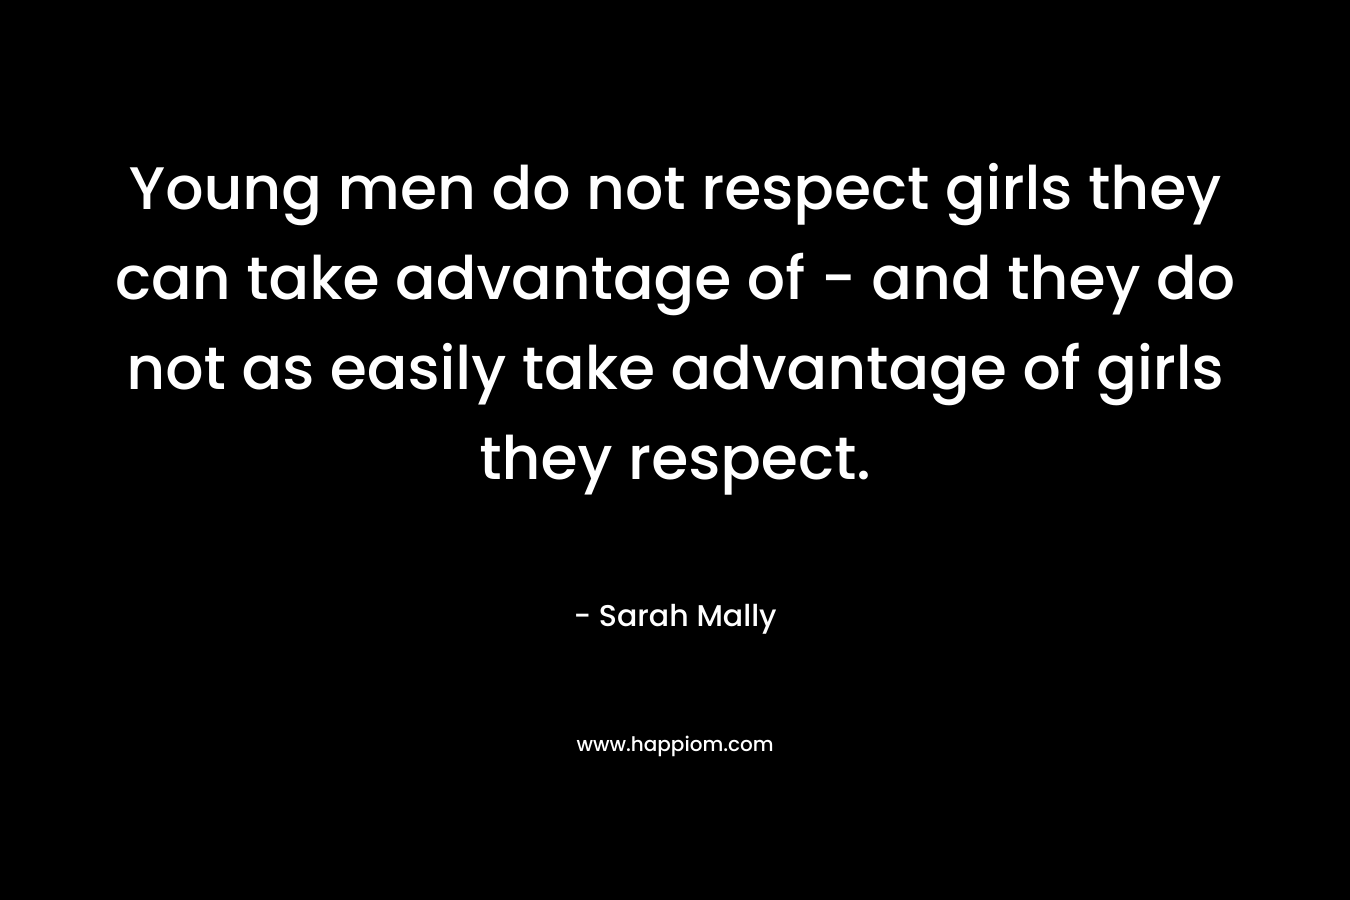 Young men do not respect girls they can take advantage of - and they do not as easily take advantage of girls they respect.